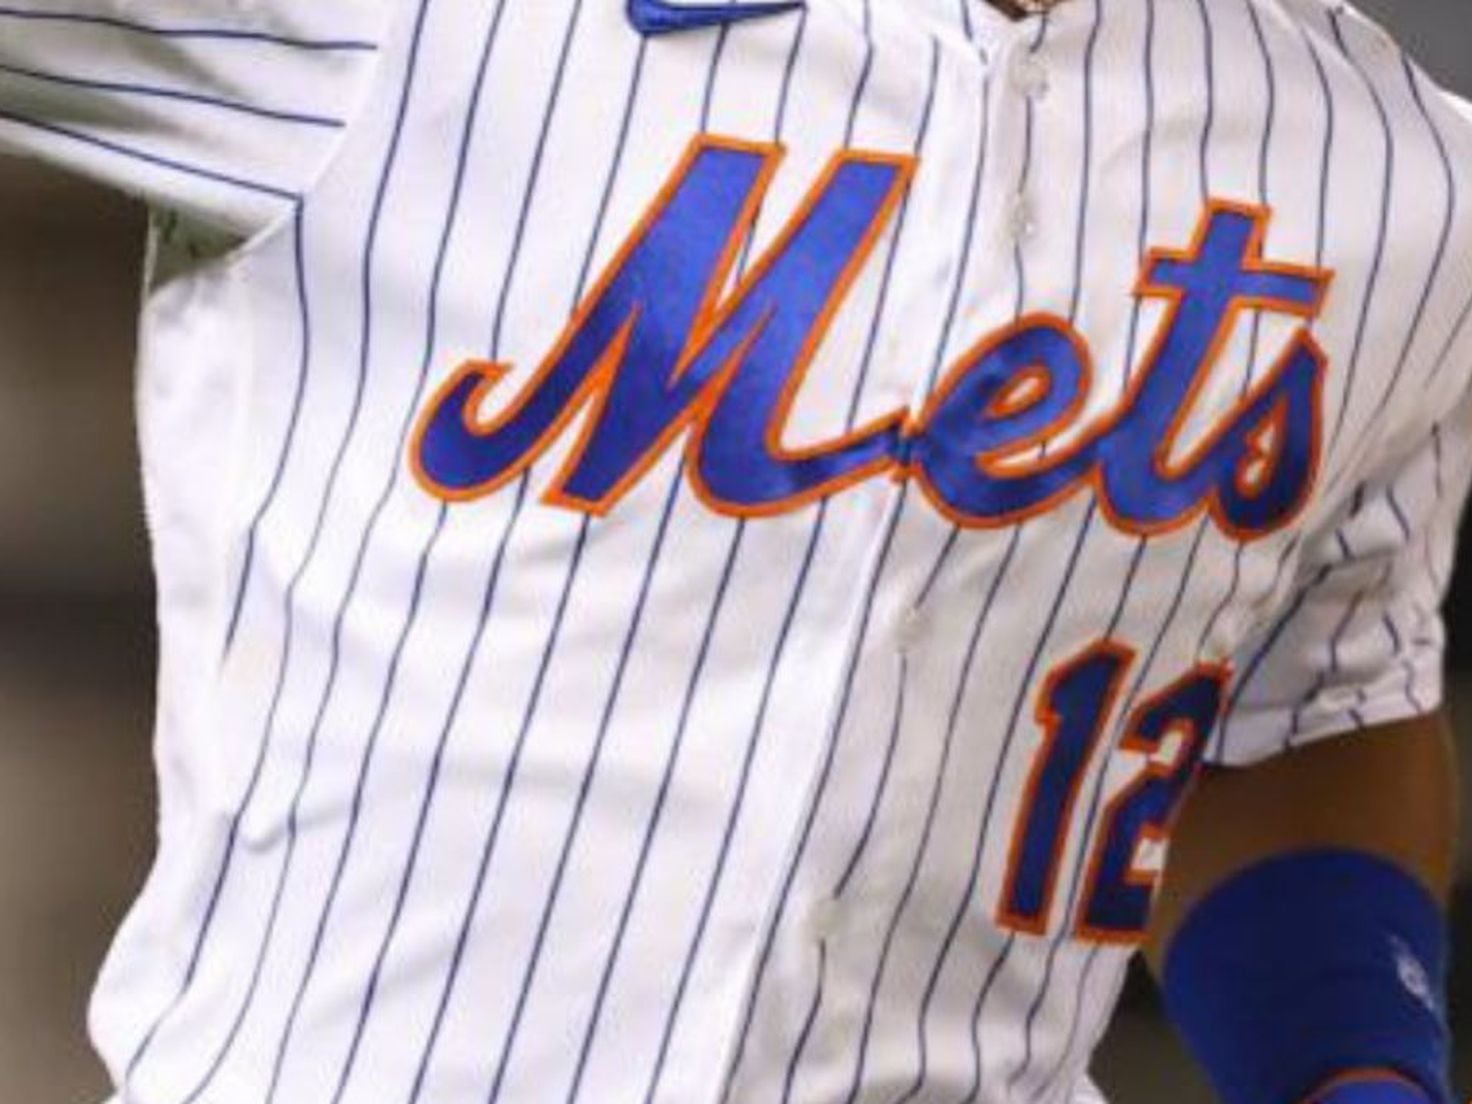 New York Mets on X: Who has the best #Mets jersey? We want to see